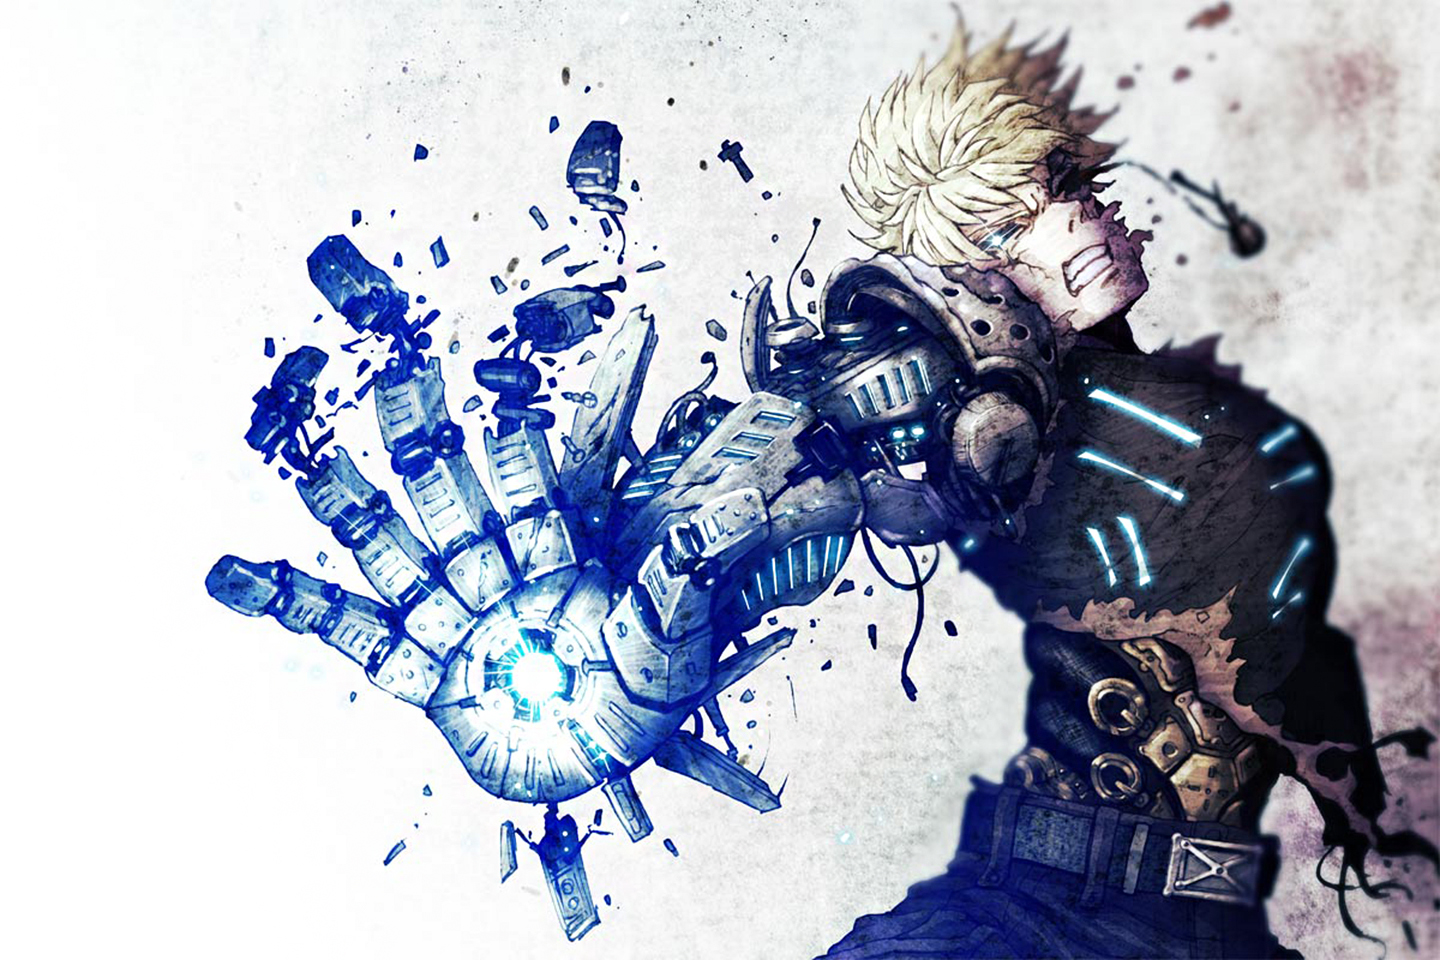 one punch man, anime, genos (one punch man)